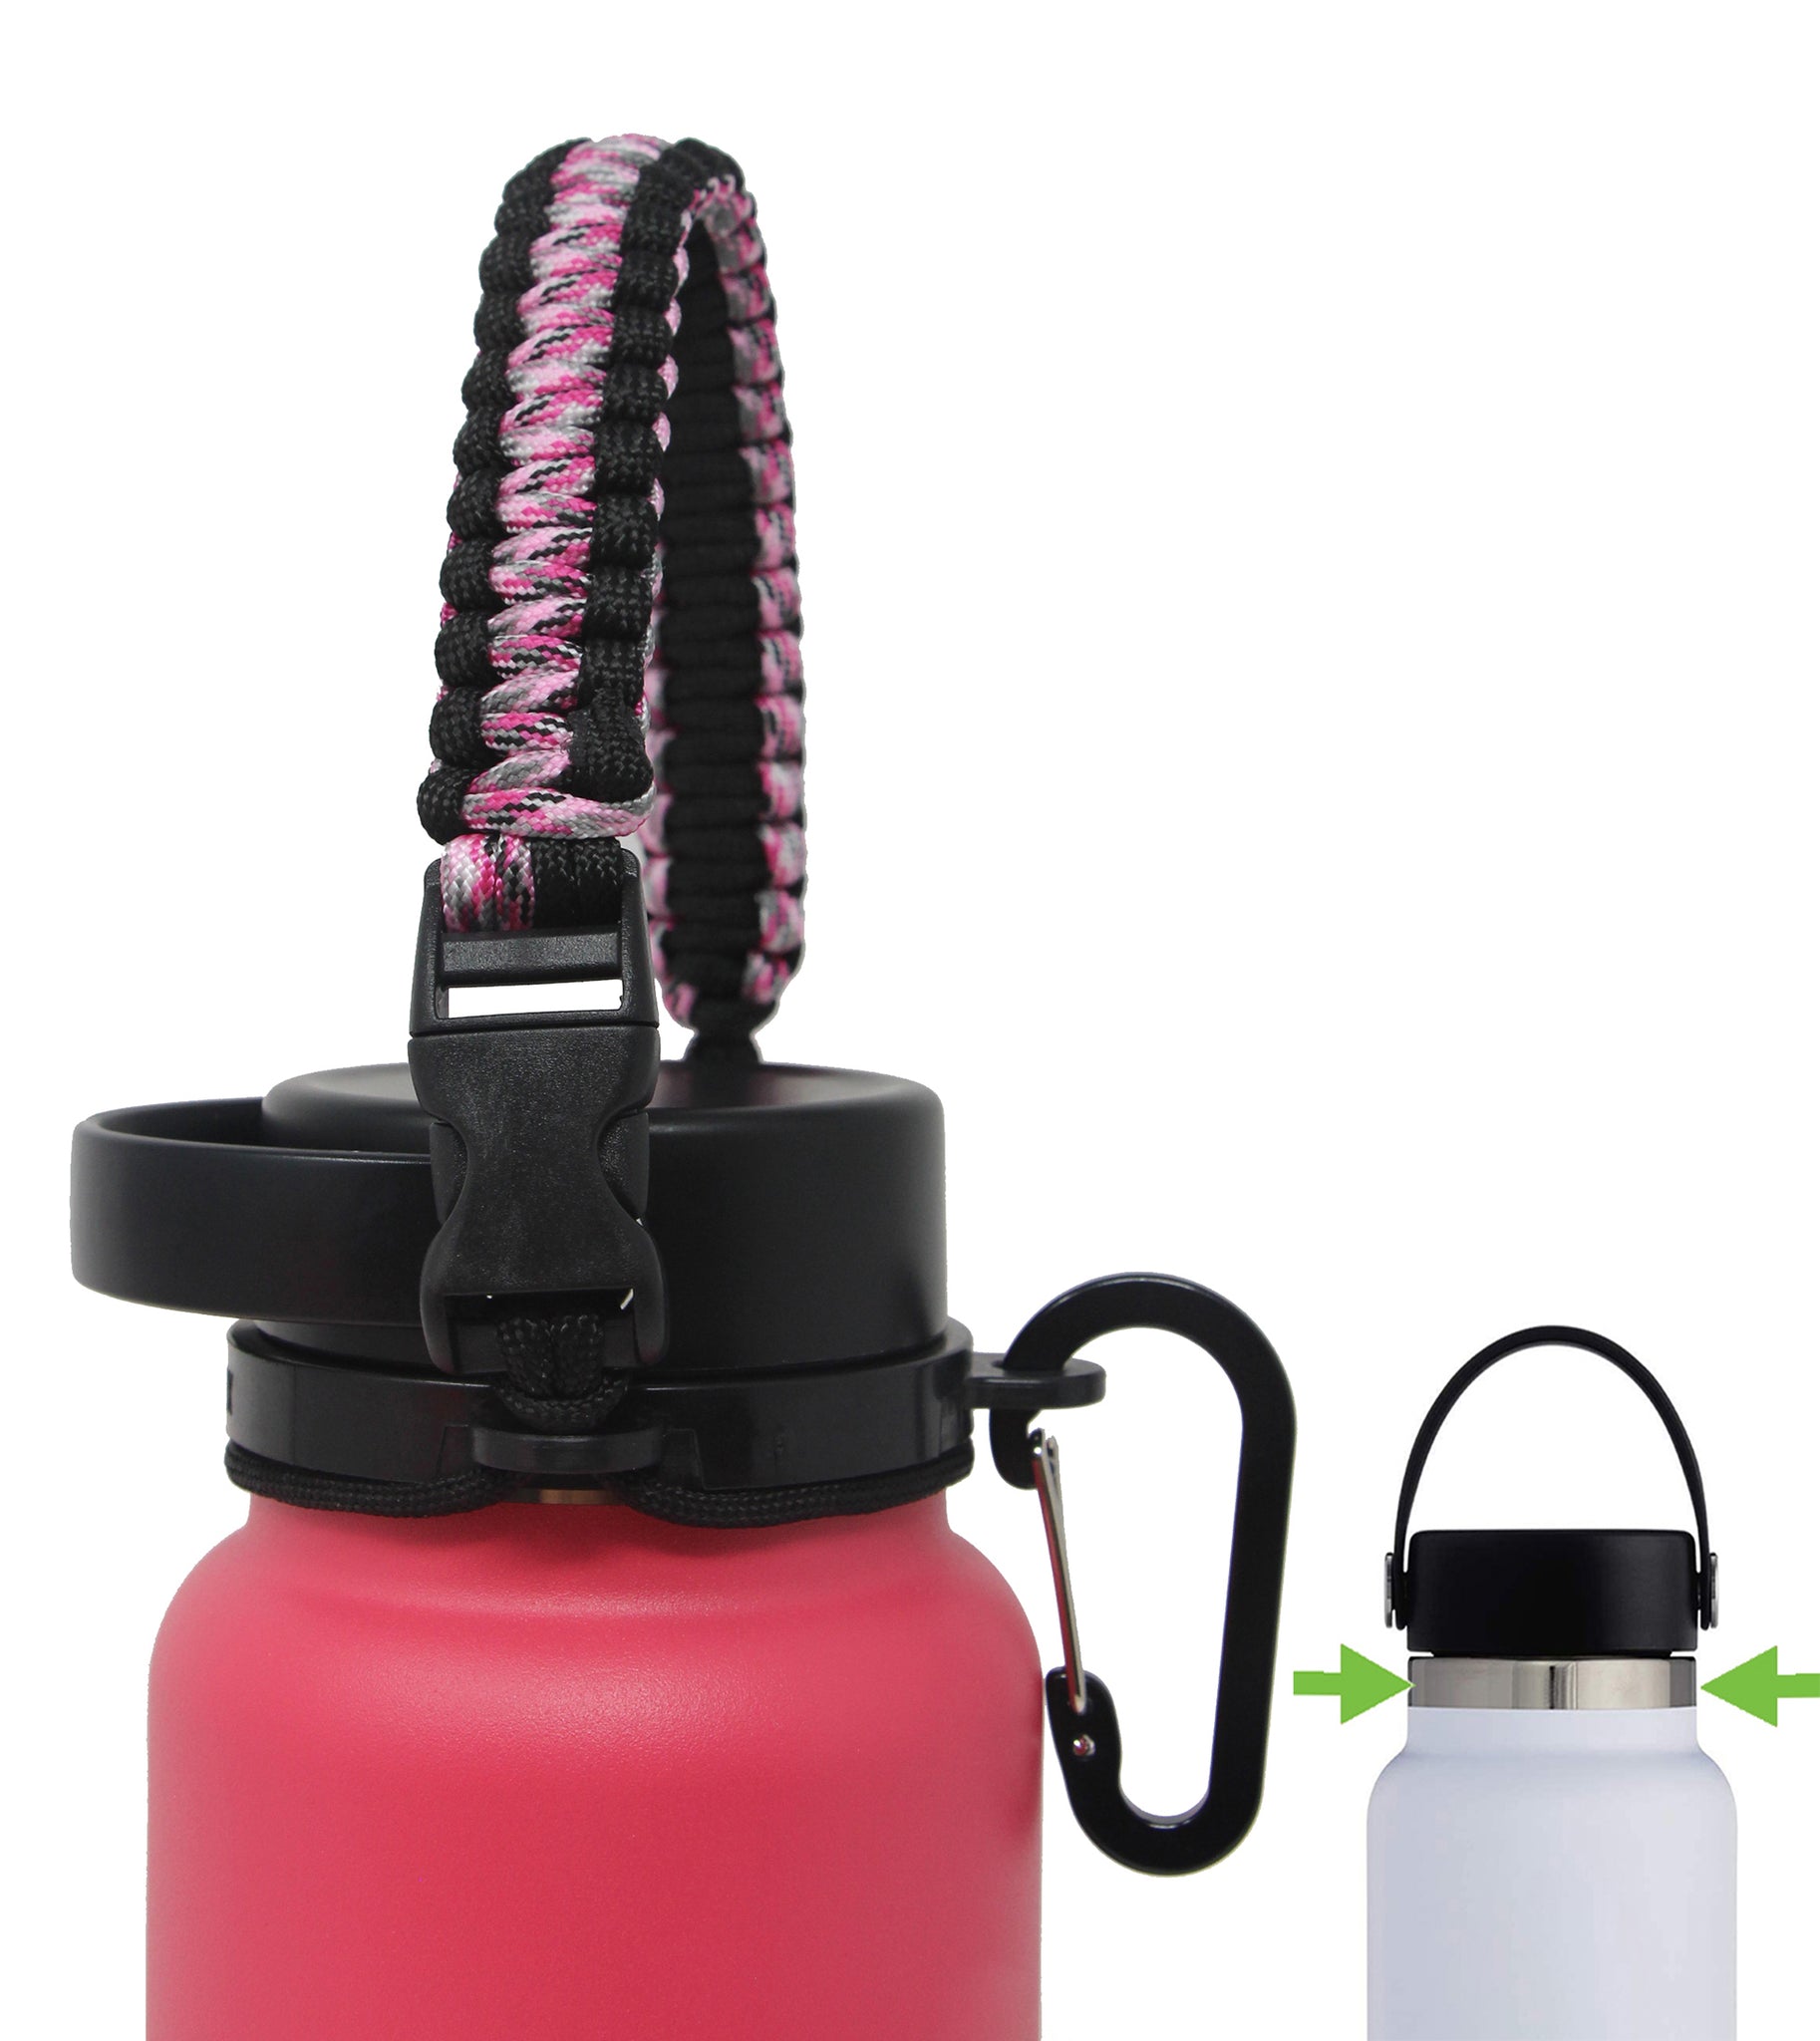  One MissionX New Paracord Handle 2.0 for Wide Mouth Water  Bottles - Compatible with Hydro Flask, Iron Flask, Simple Modern Summit,  Fits 12oz to 64oz - Durable & Secure Accessories (